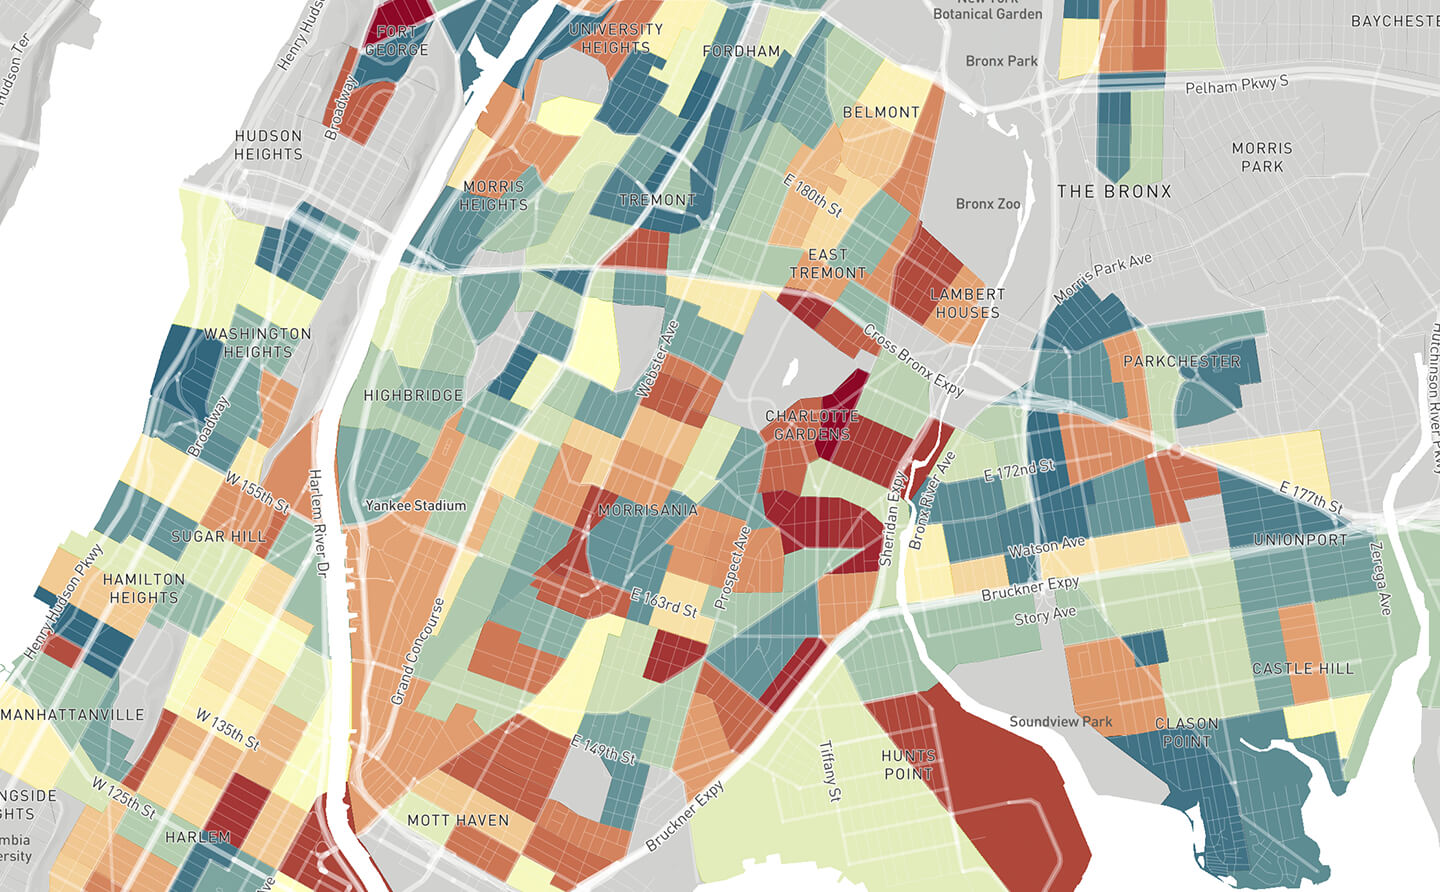 The Opportunity Atlas is an initial release of social mobility data, the result of a collaboration between researchers at the Census Bureau, Harvard University, and Brown University.